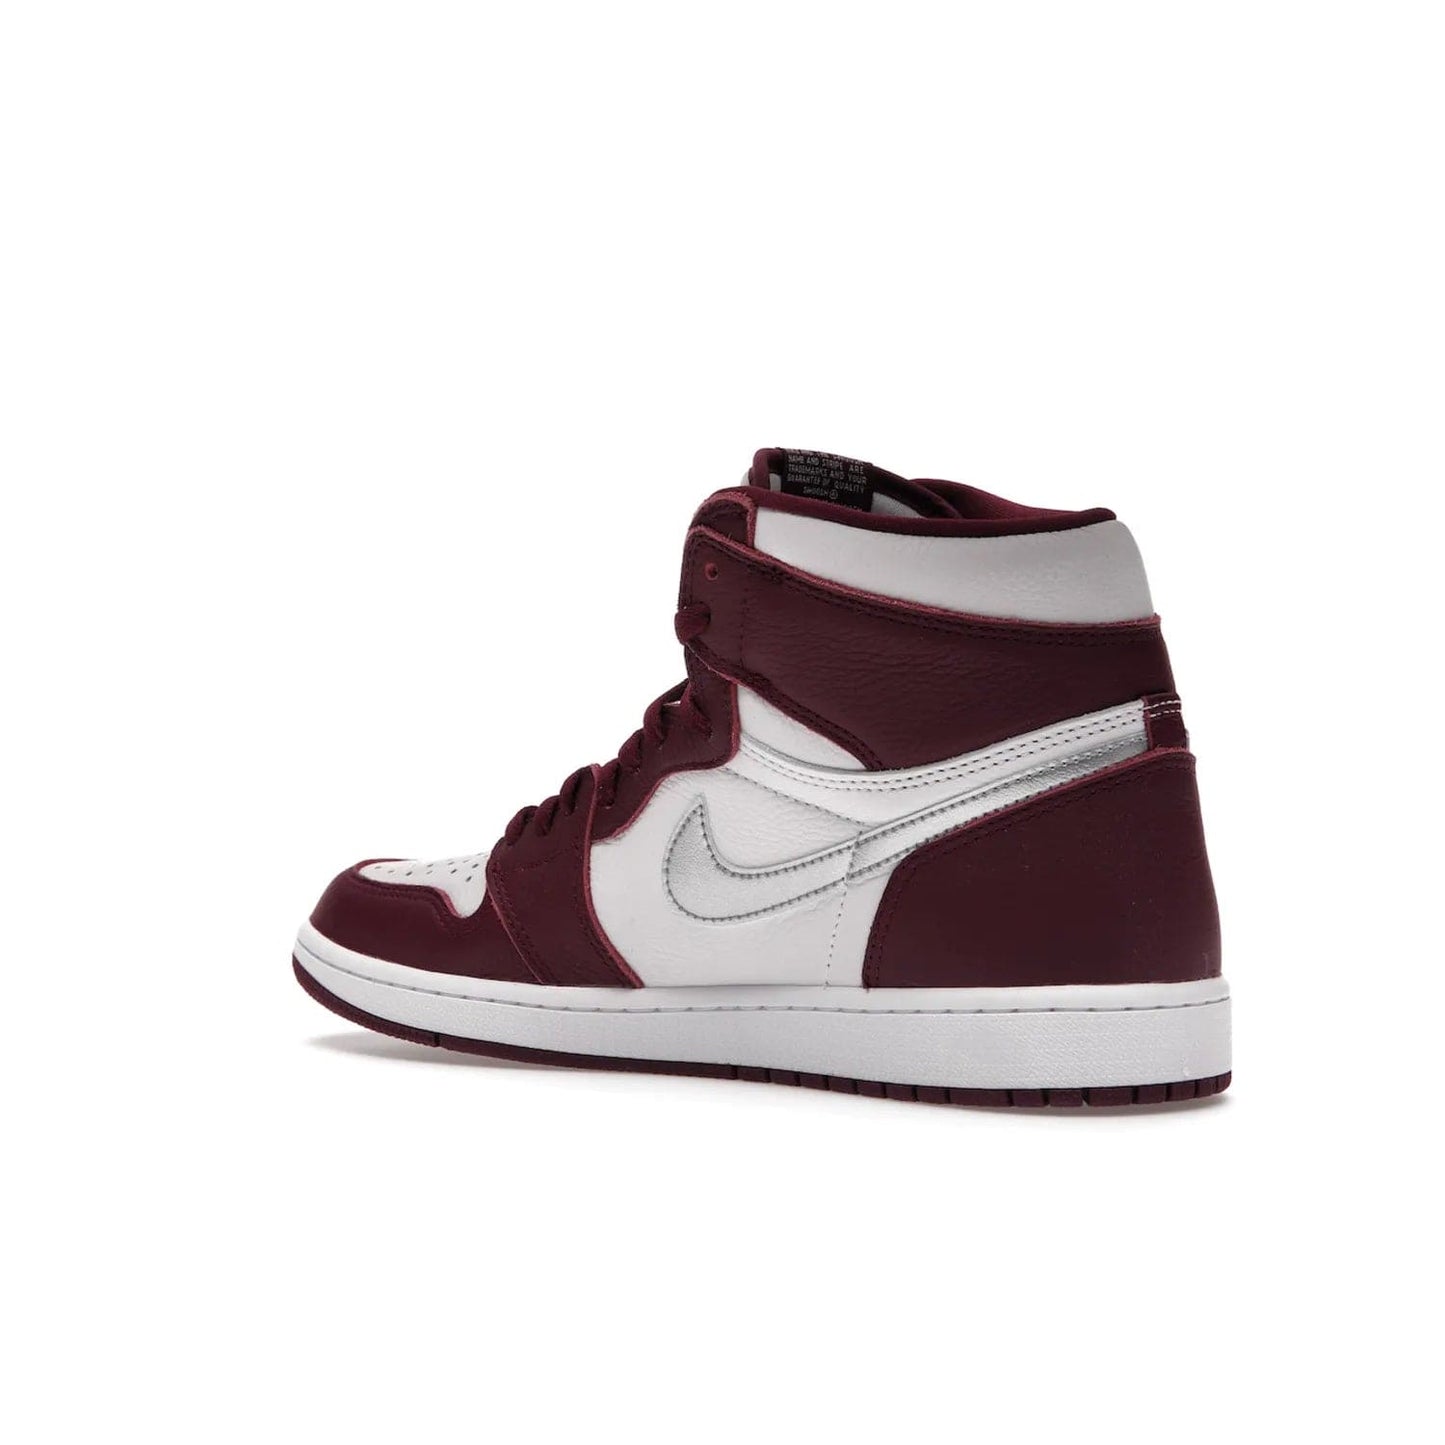 Jordan 1 Retro High OG Bordeaux - Image 23 - Only at www.BallersClubKickz.com - Shop the classic Air Jordan 1 High Bordeaux with a modern high-top cut. The timeless Bordeaux and White-Metallic Silver colorway, releasing Nov 20, 2021, is perfect for practice or a night out.